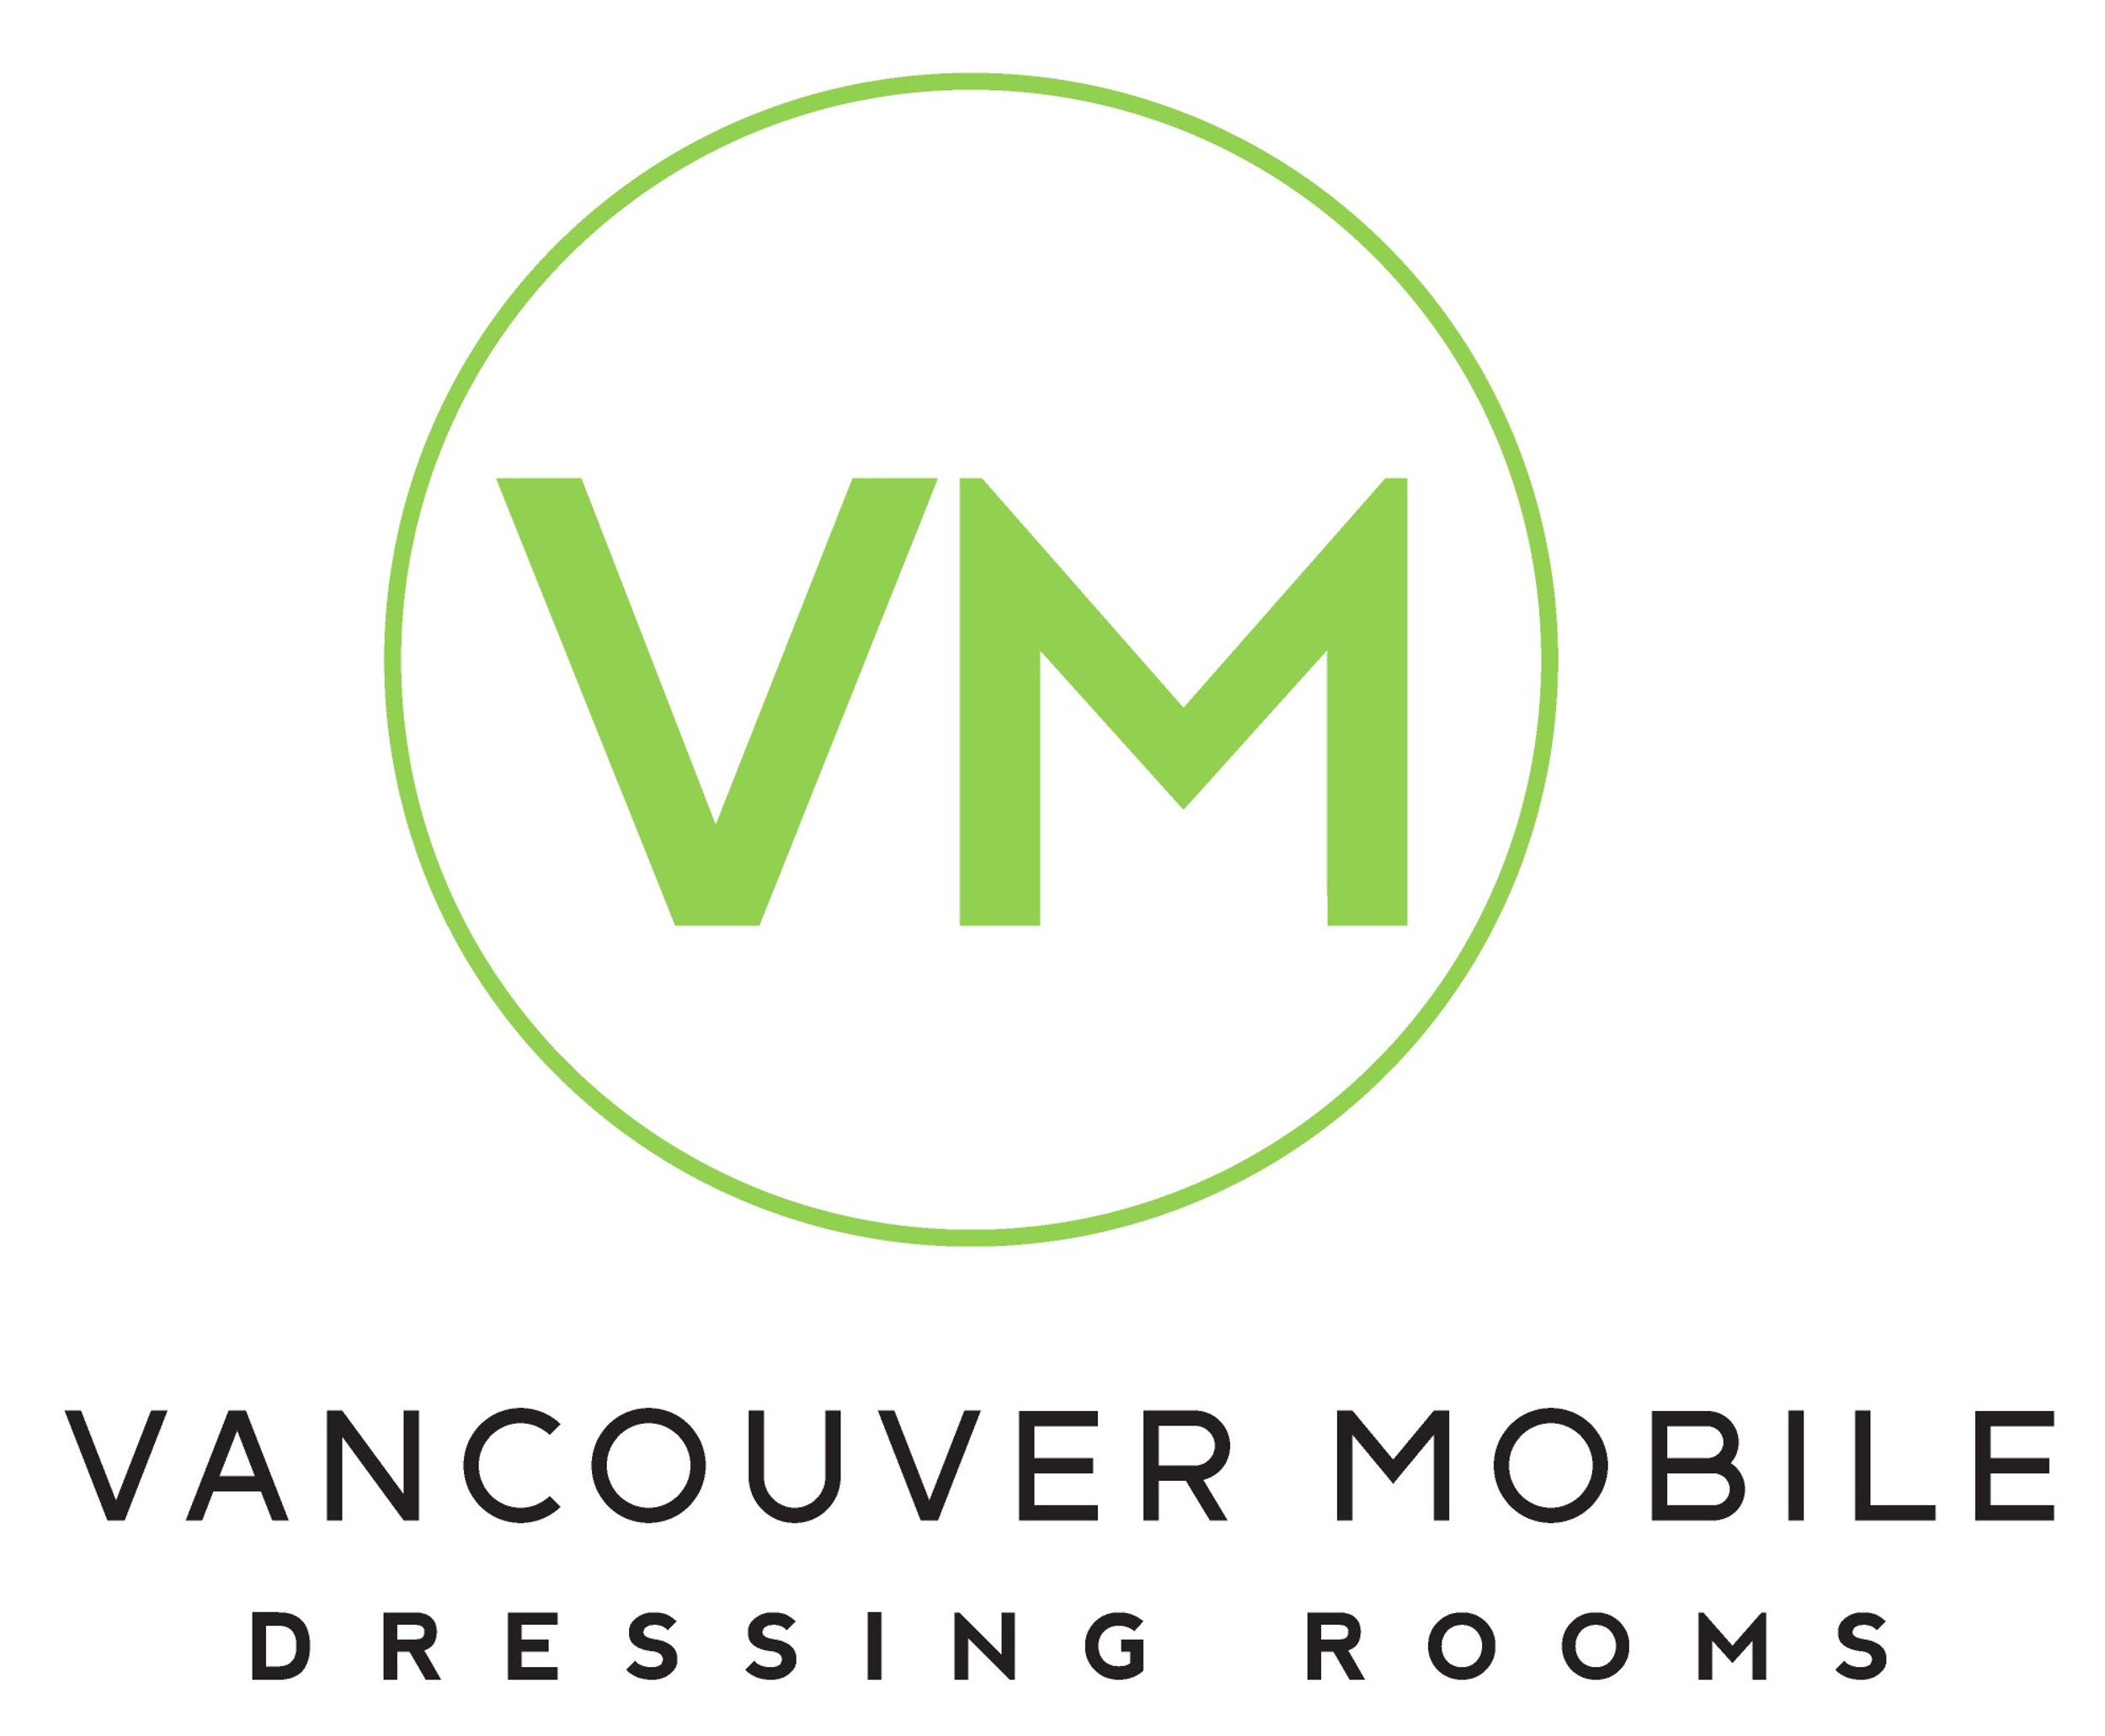 Vancouver Mobile Dressing Rooms